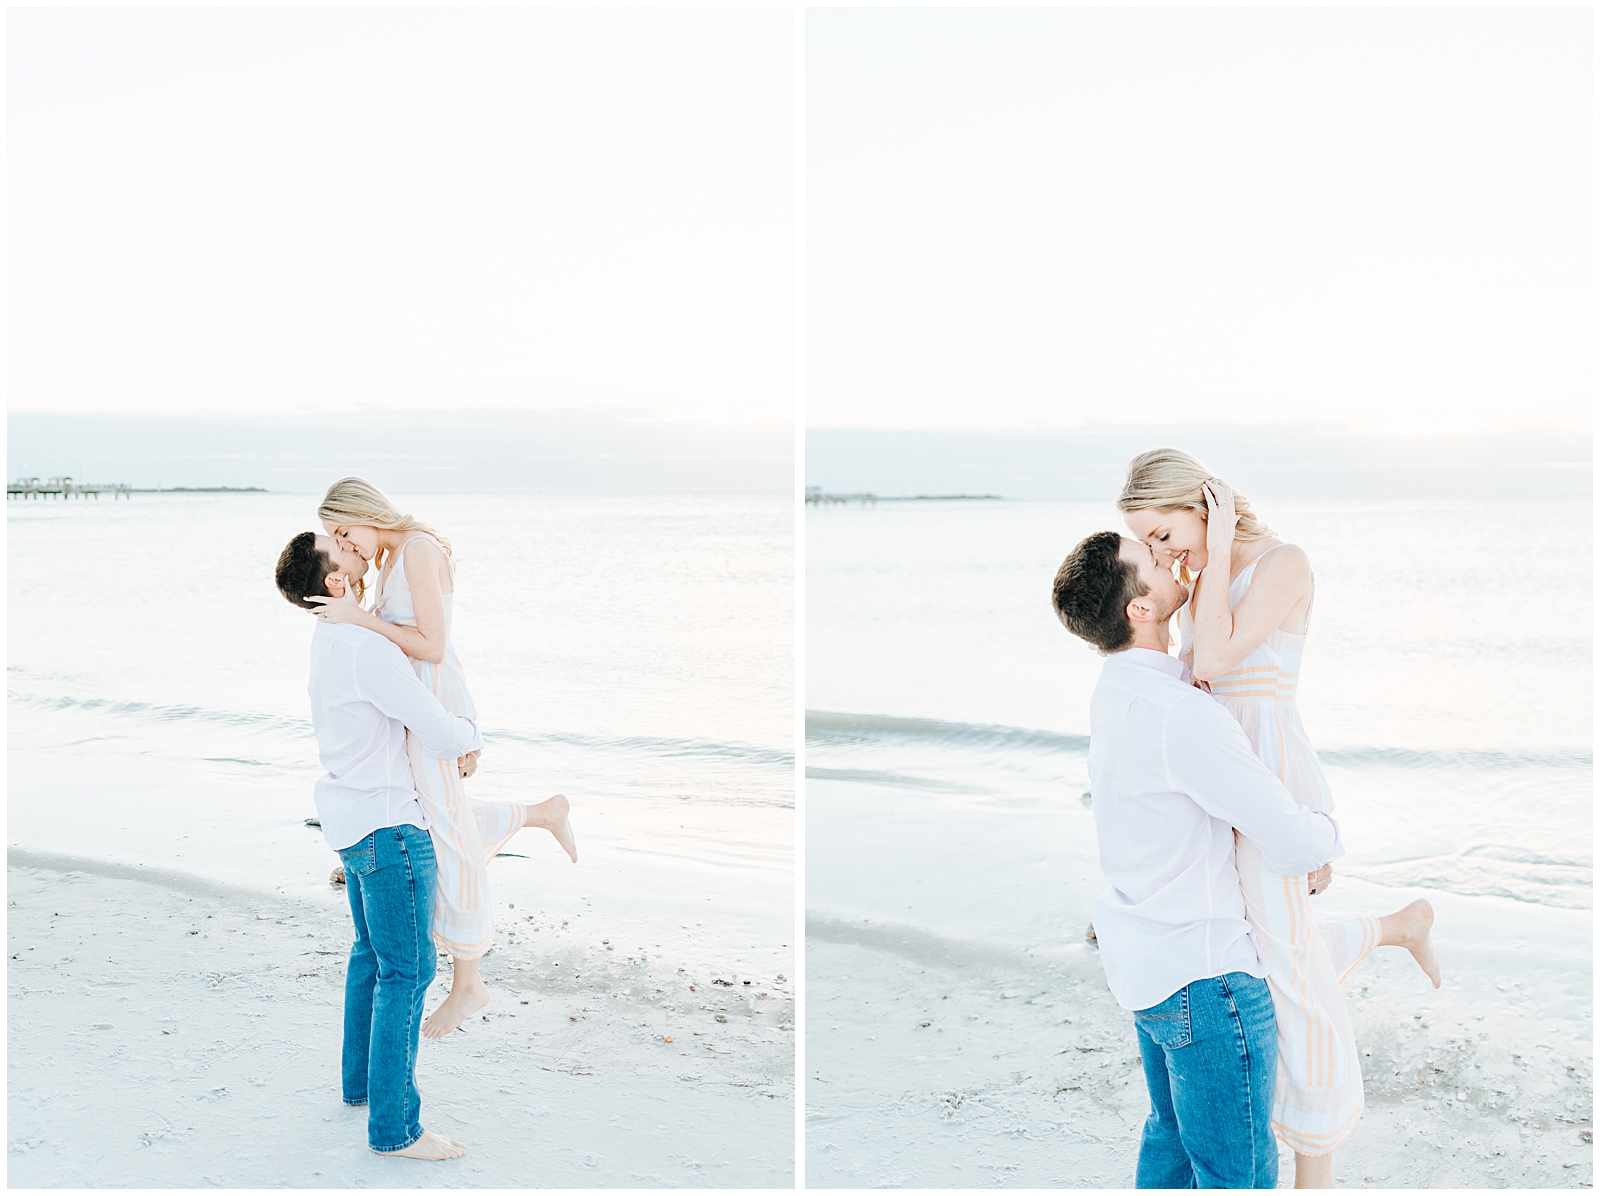 Lift and Kiss on the beach at golden hour at Fort Desoto in St. Petersburg Florida